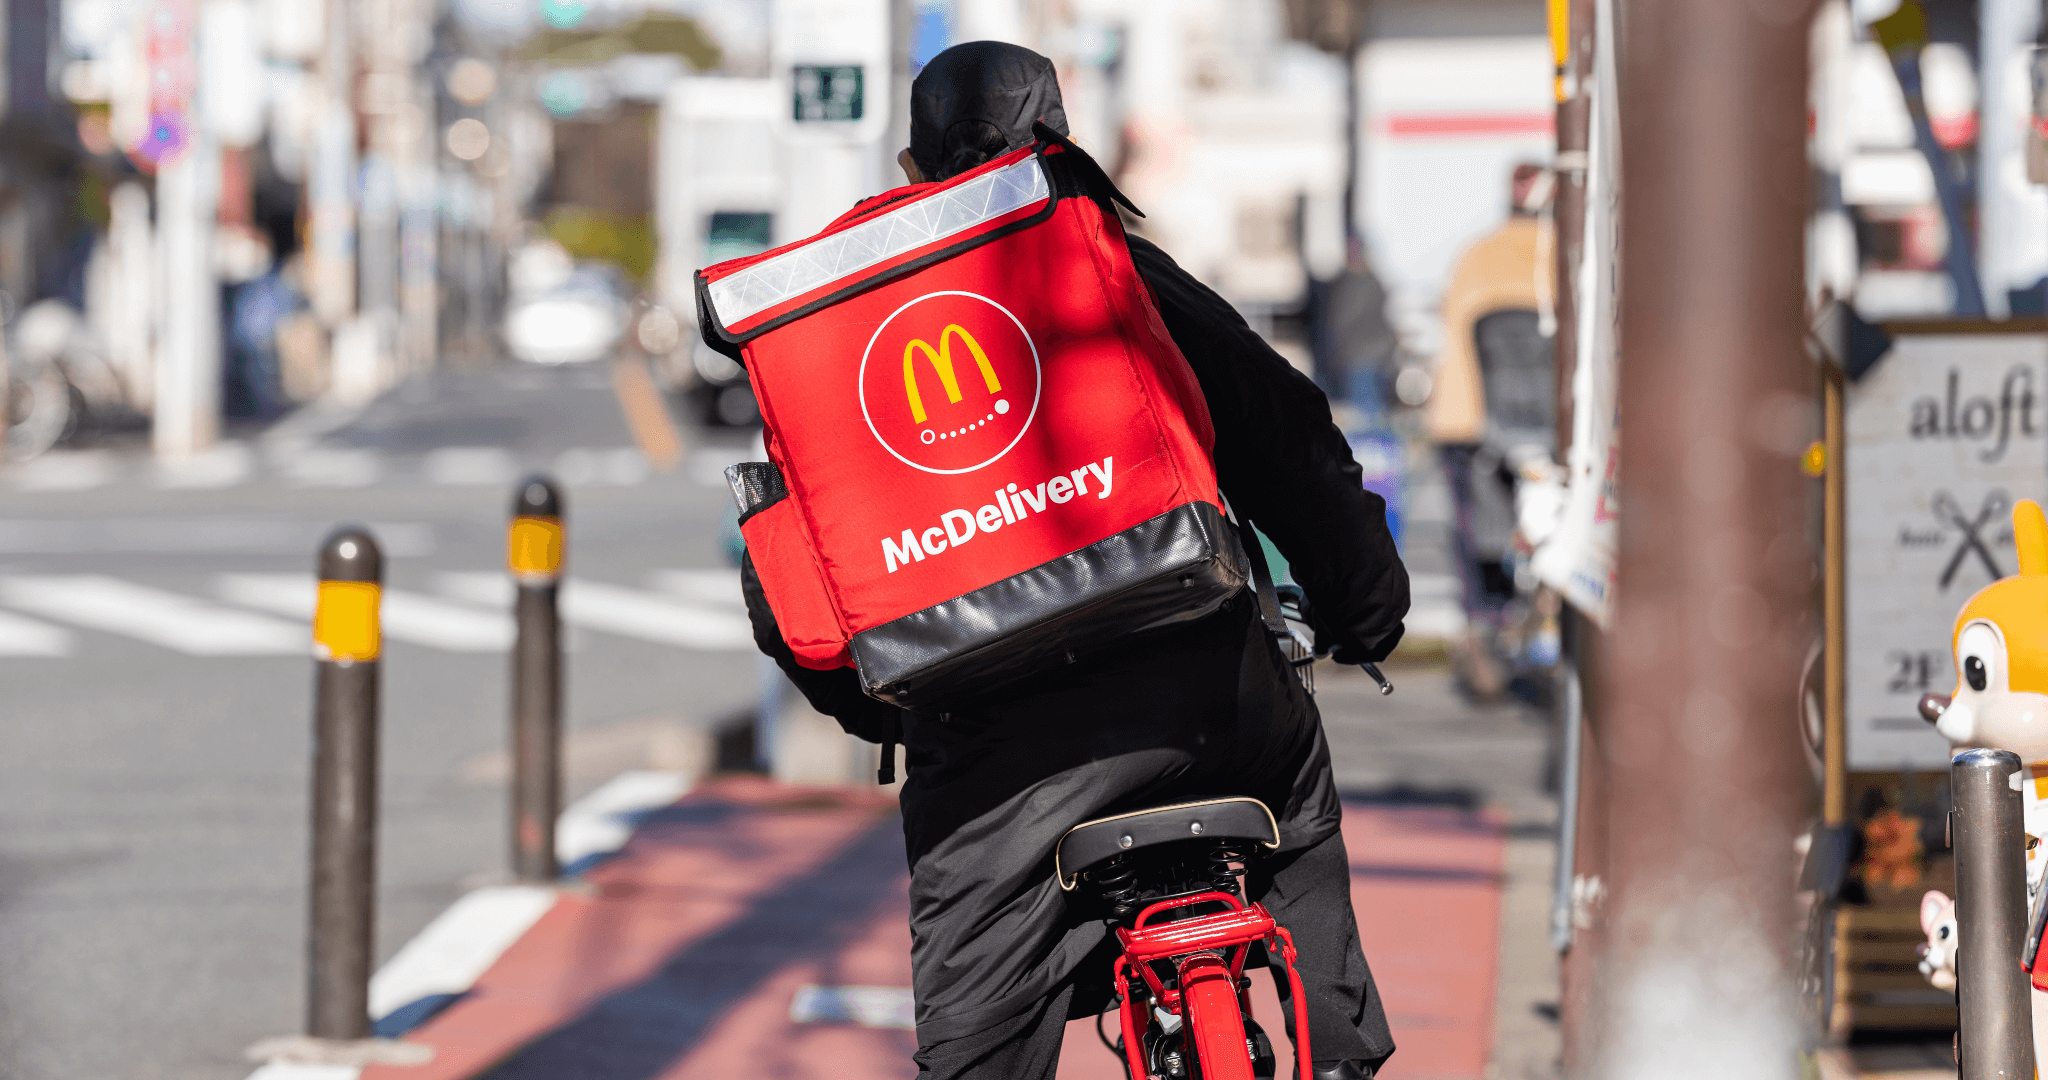 McDonalds delivery rider on bike